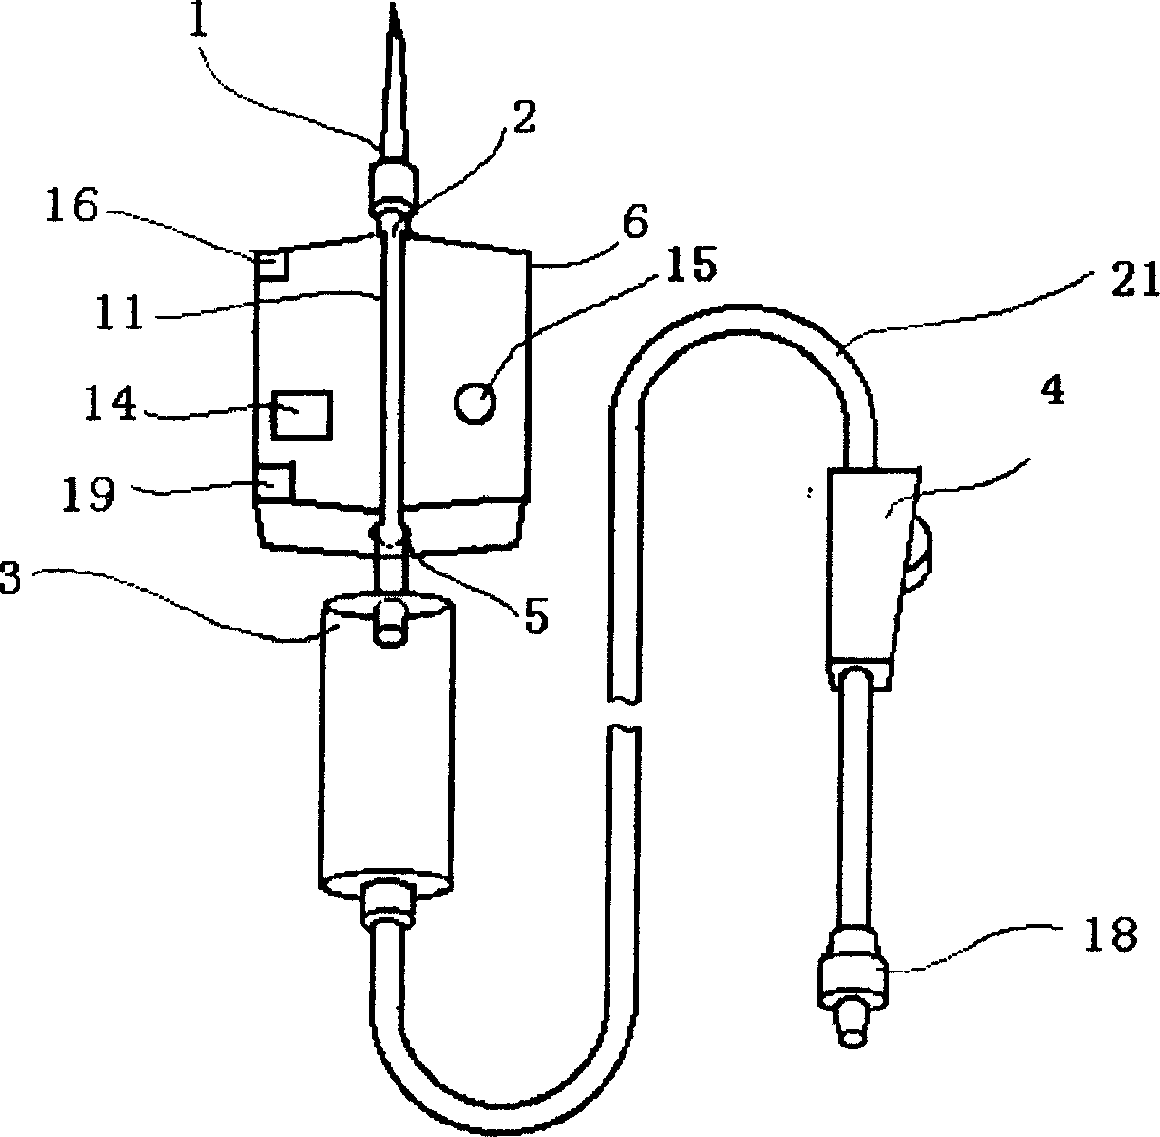 Electronic prompting transfusion device